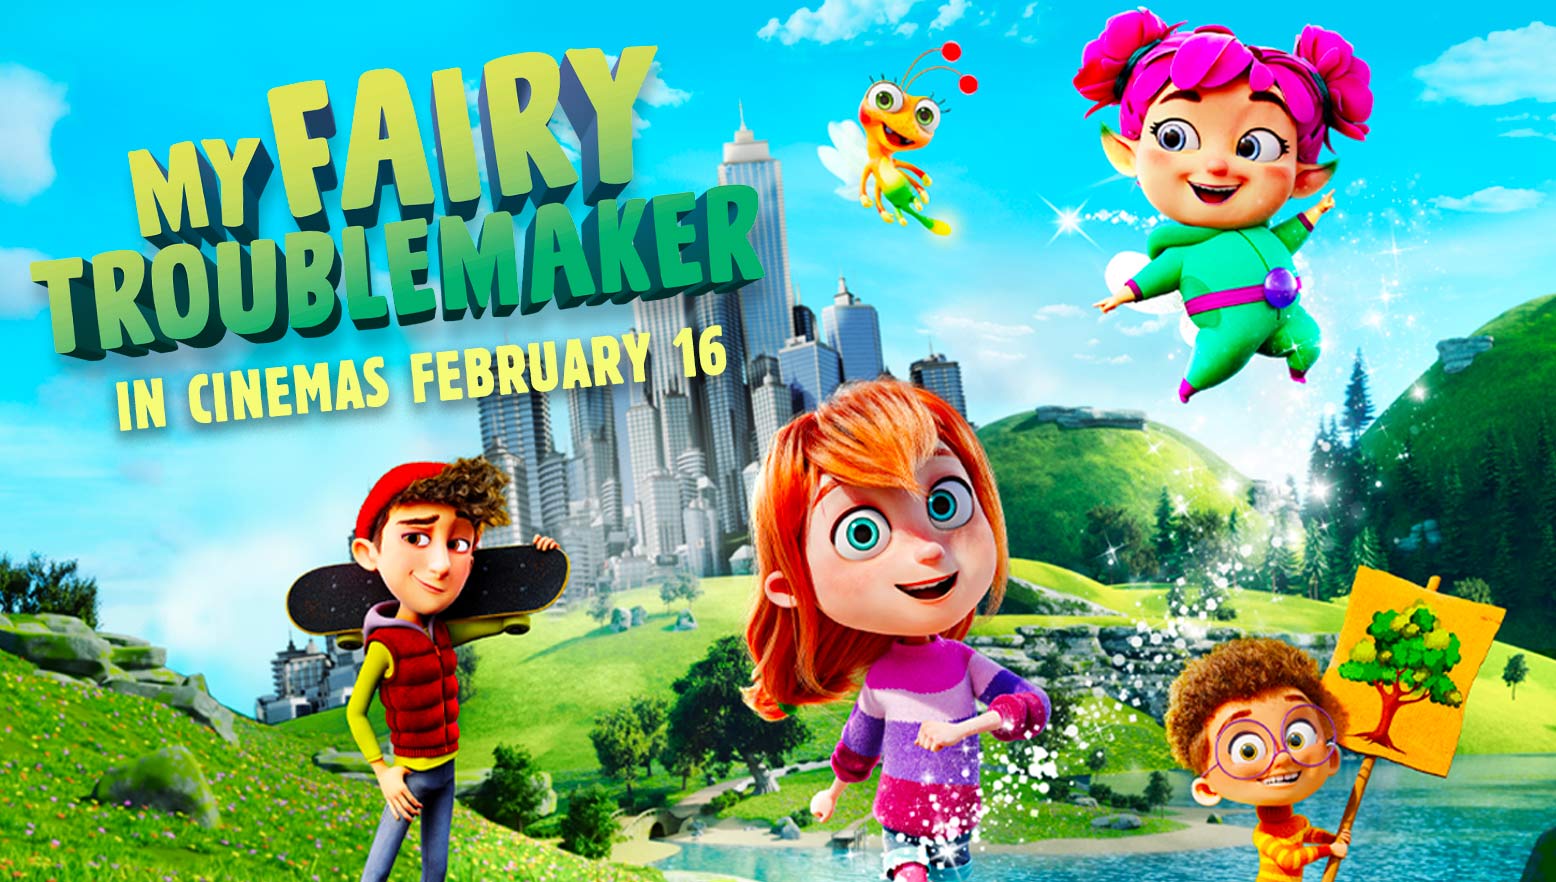 Win 1 of 15 Family Passes to My Fairy Troublemaker